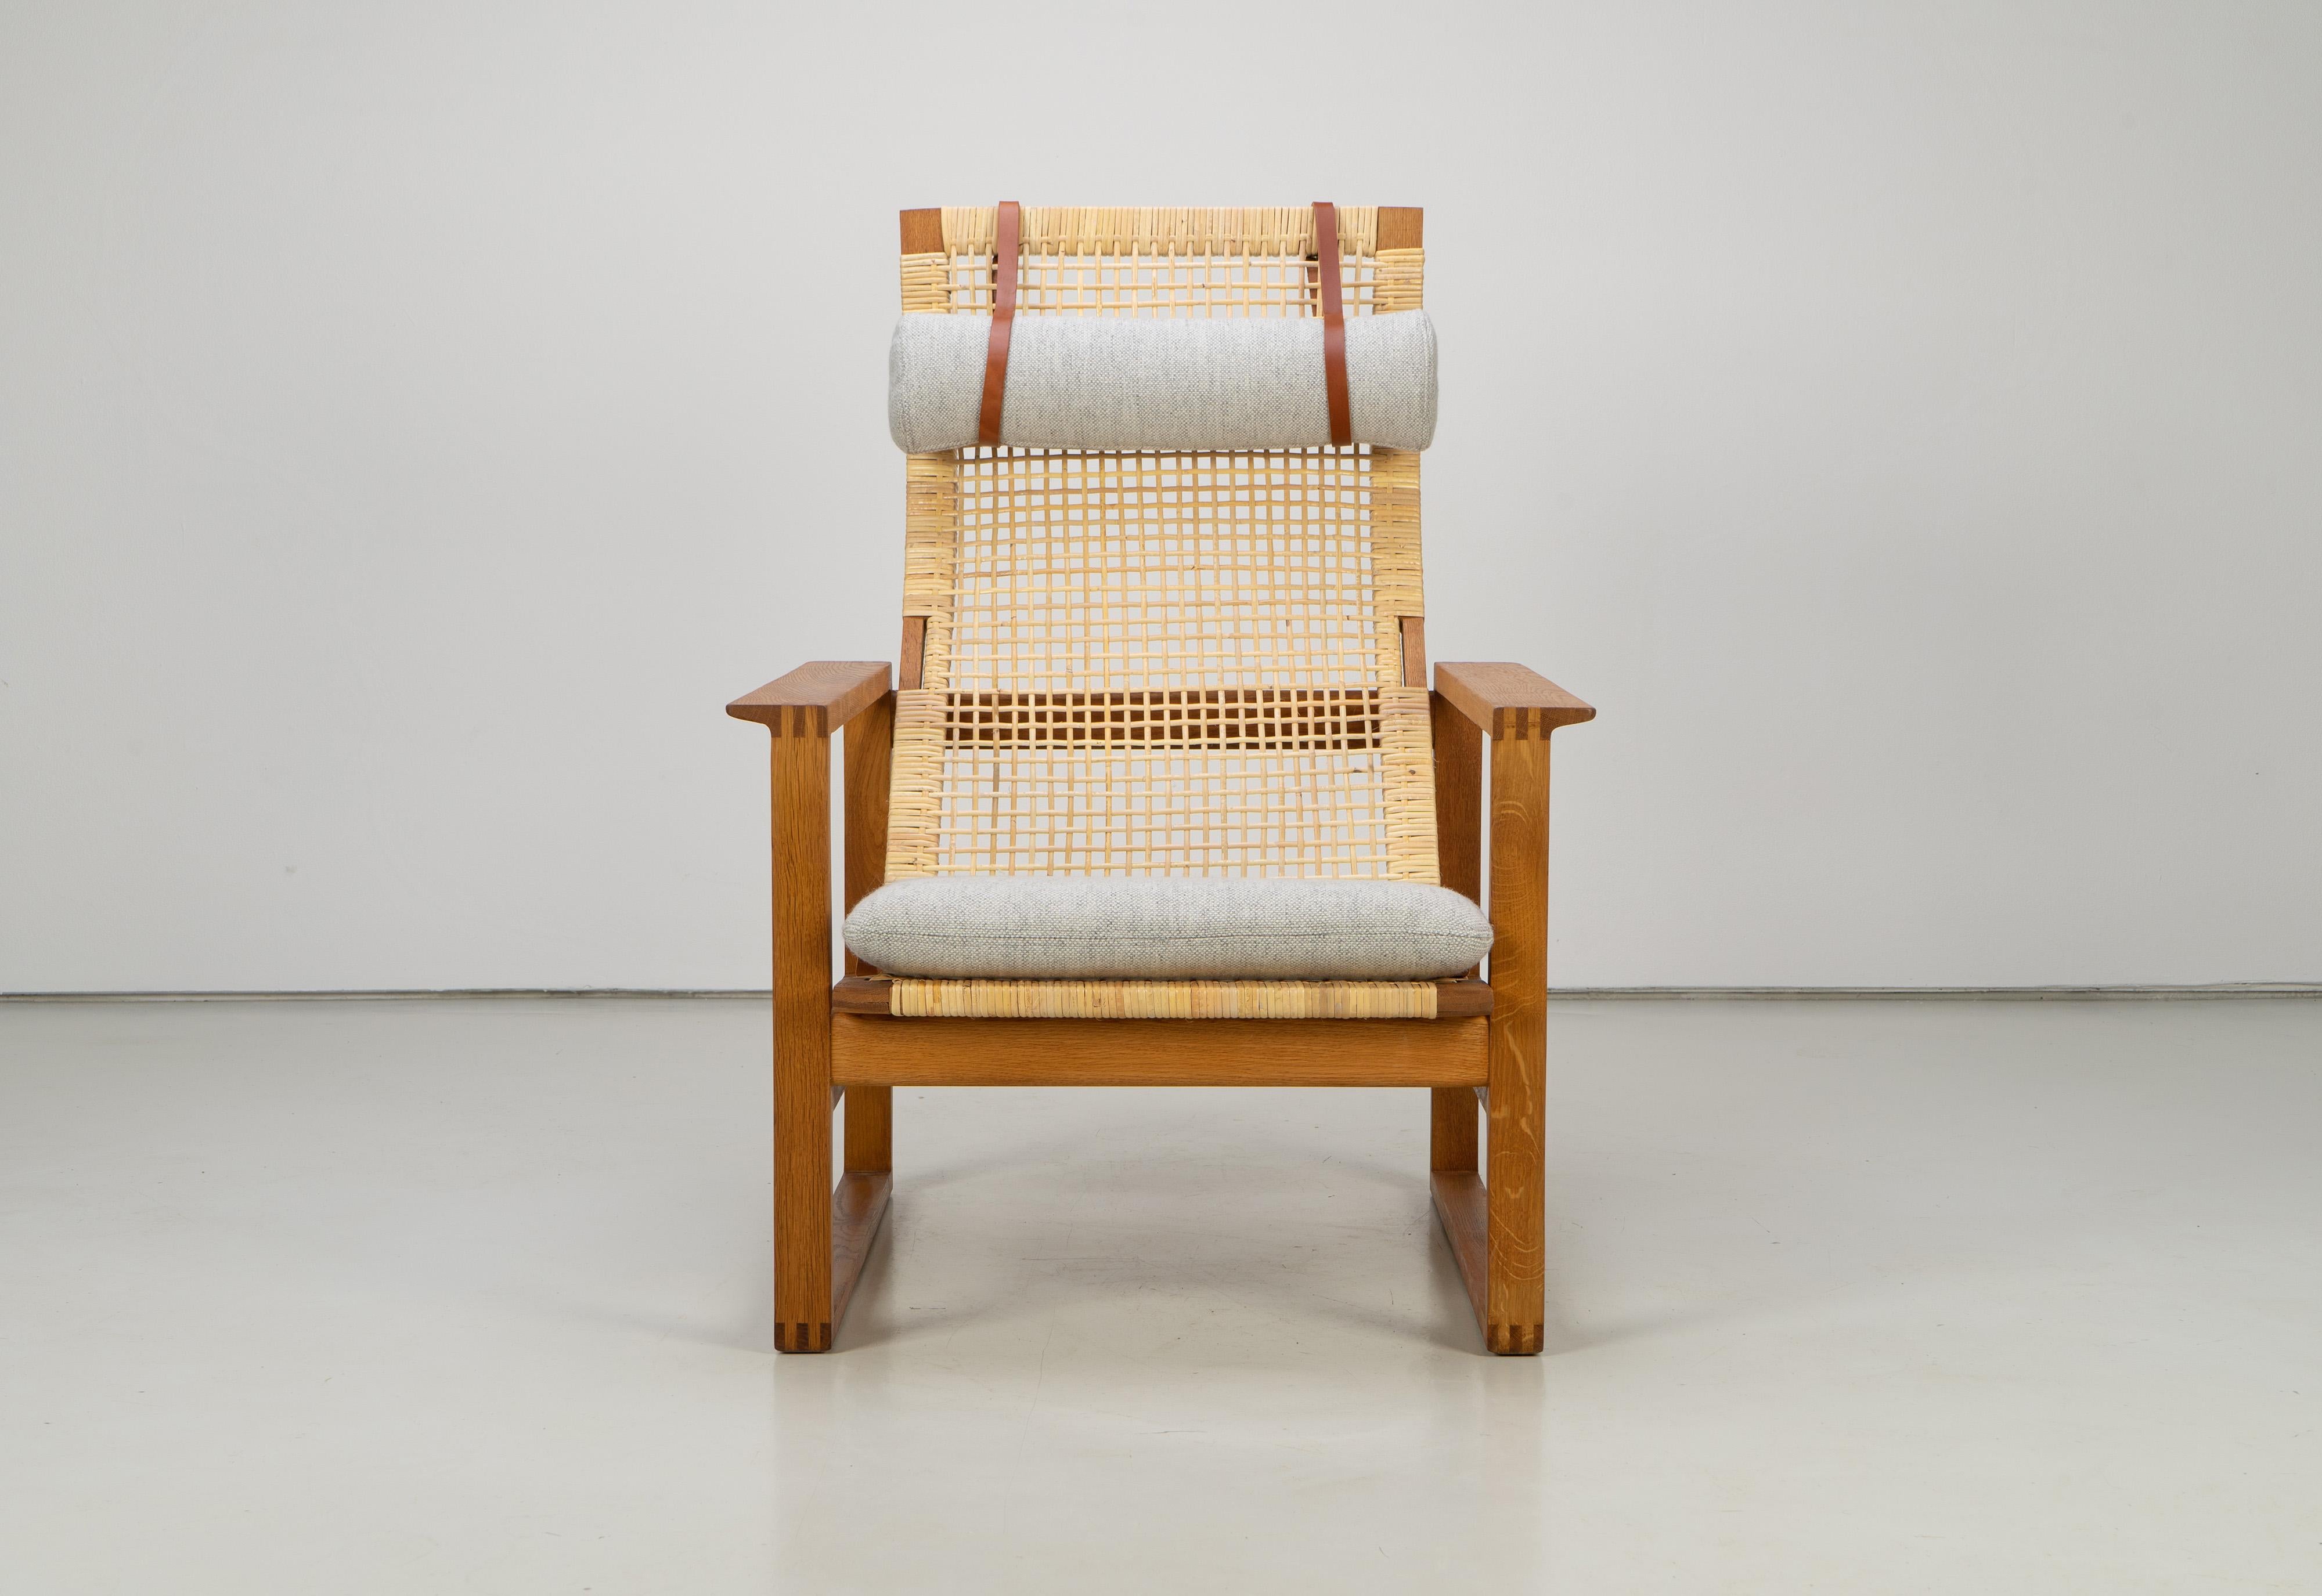 20th Century Danish Lounge Chair with Rattan Mod. 2254 by Børge Mogensen Fredericia Oak 1960s